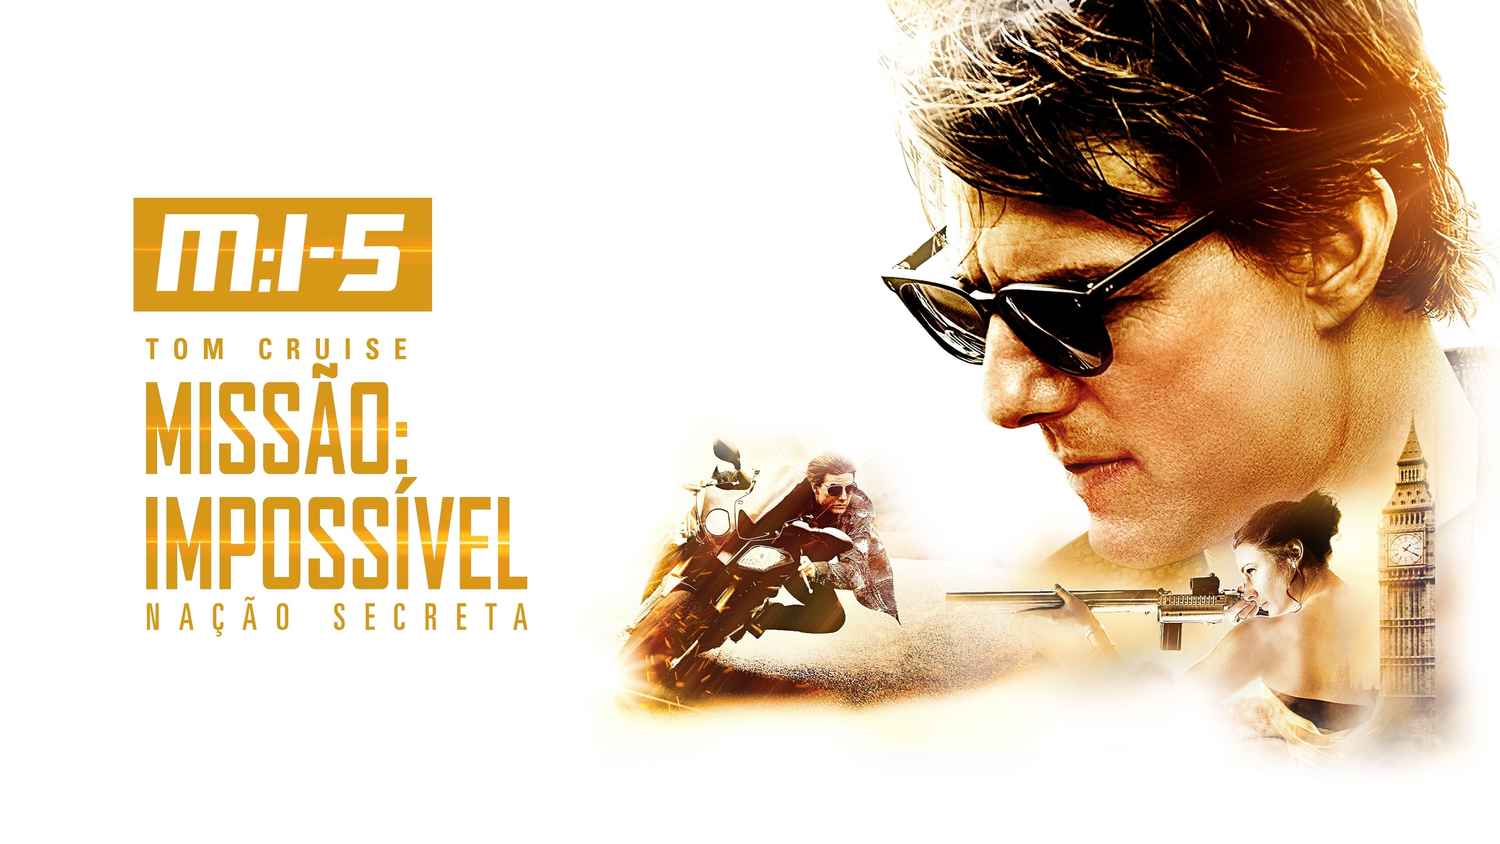 mission impossible 5 hd online